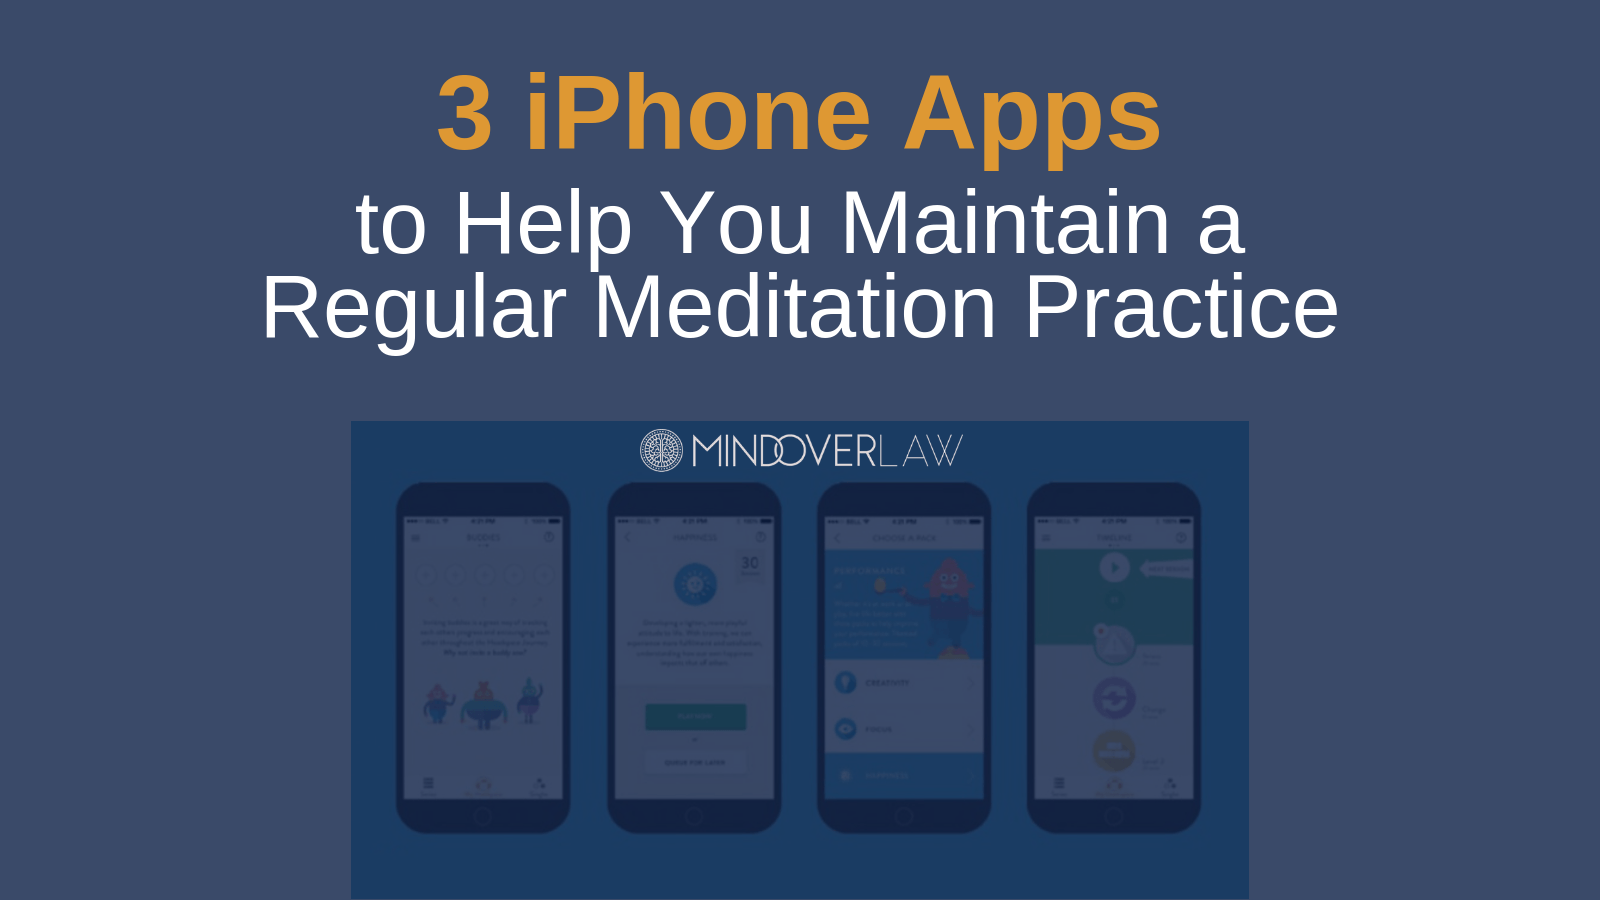 3 iPhone Apps to Help You Maintain a Regular Meditation Practice - mind over law